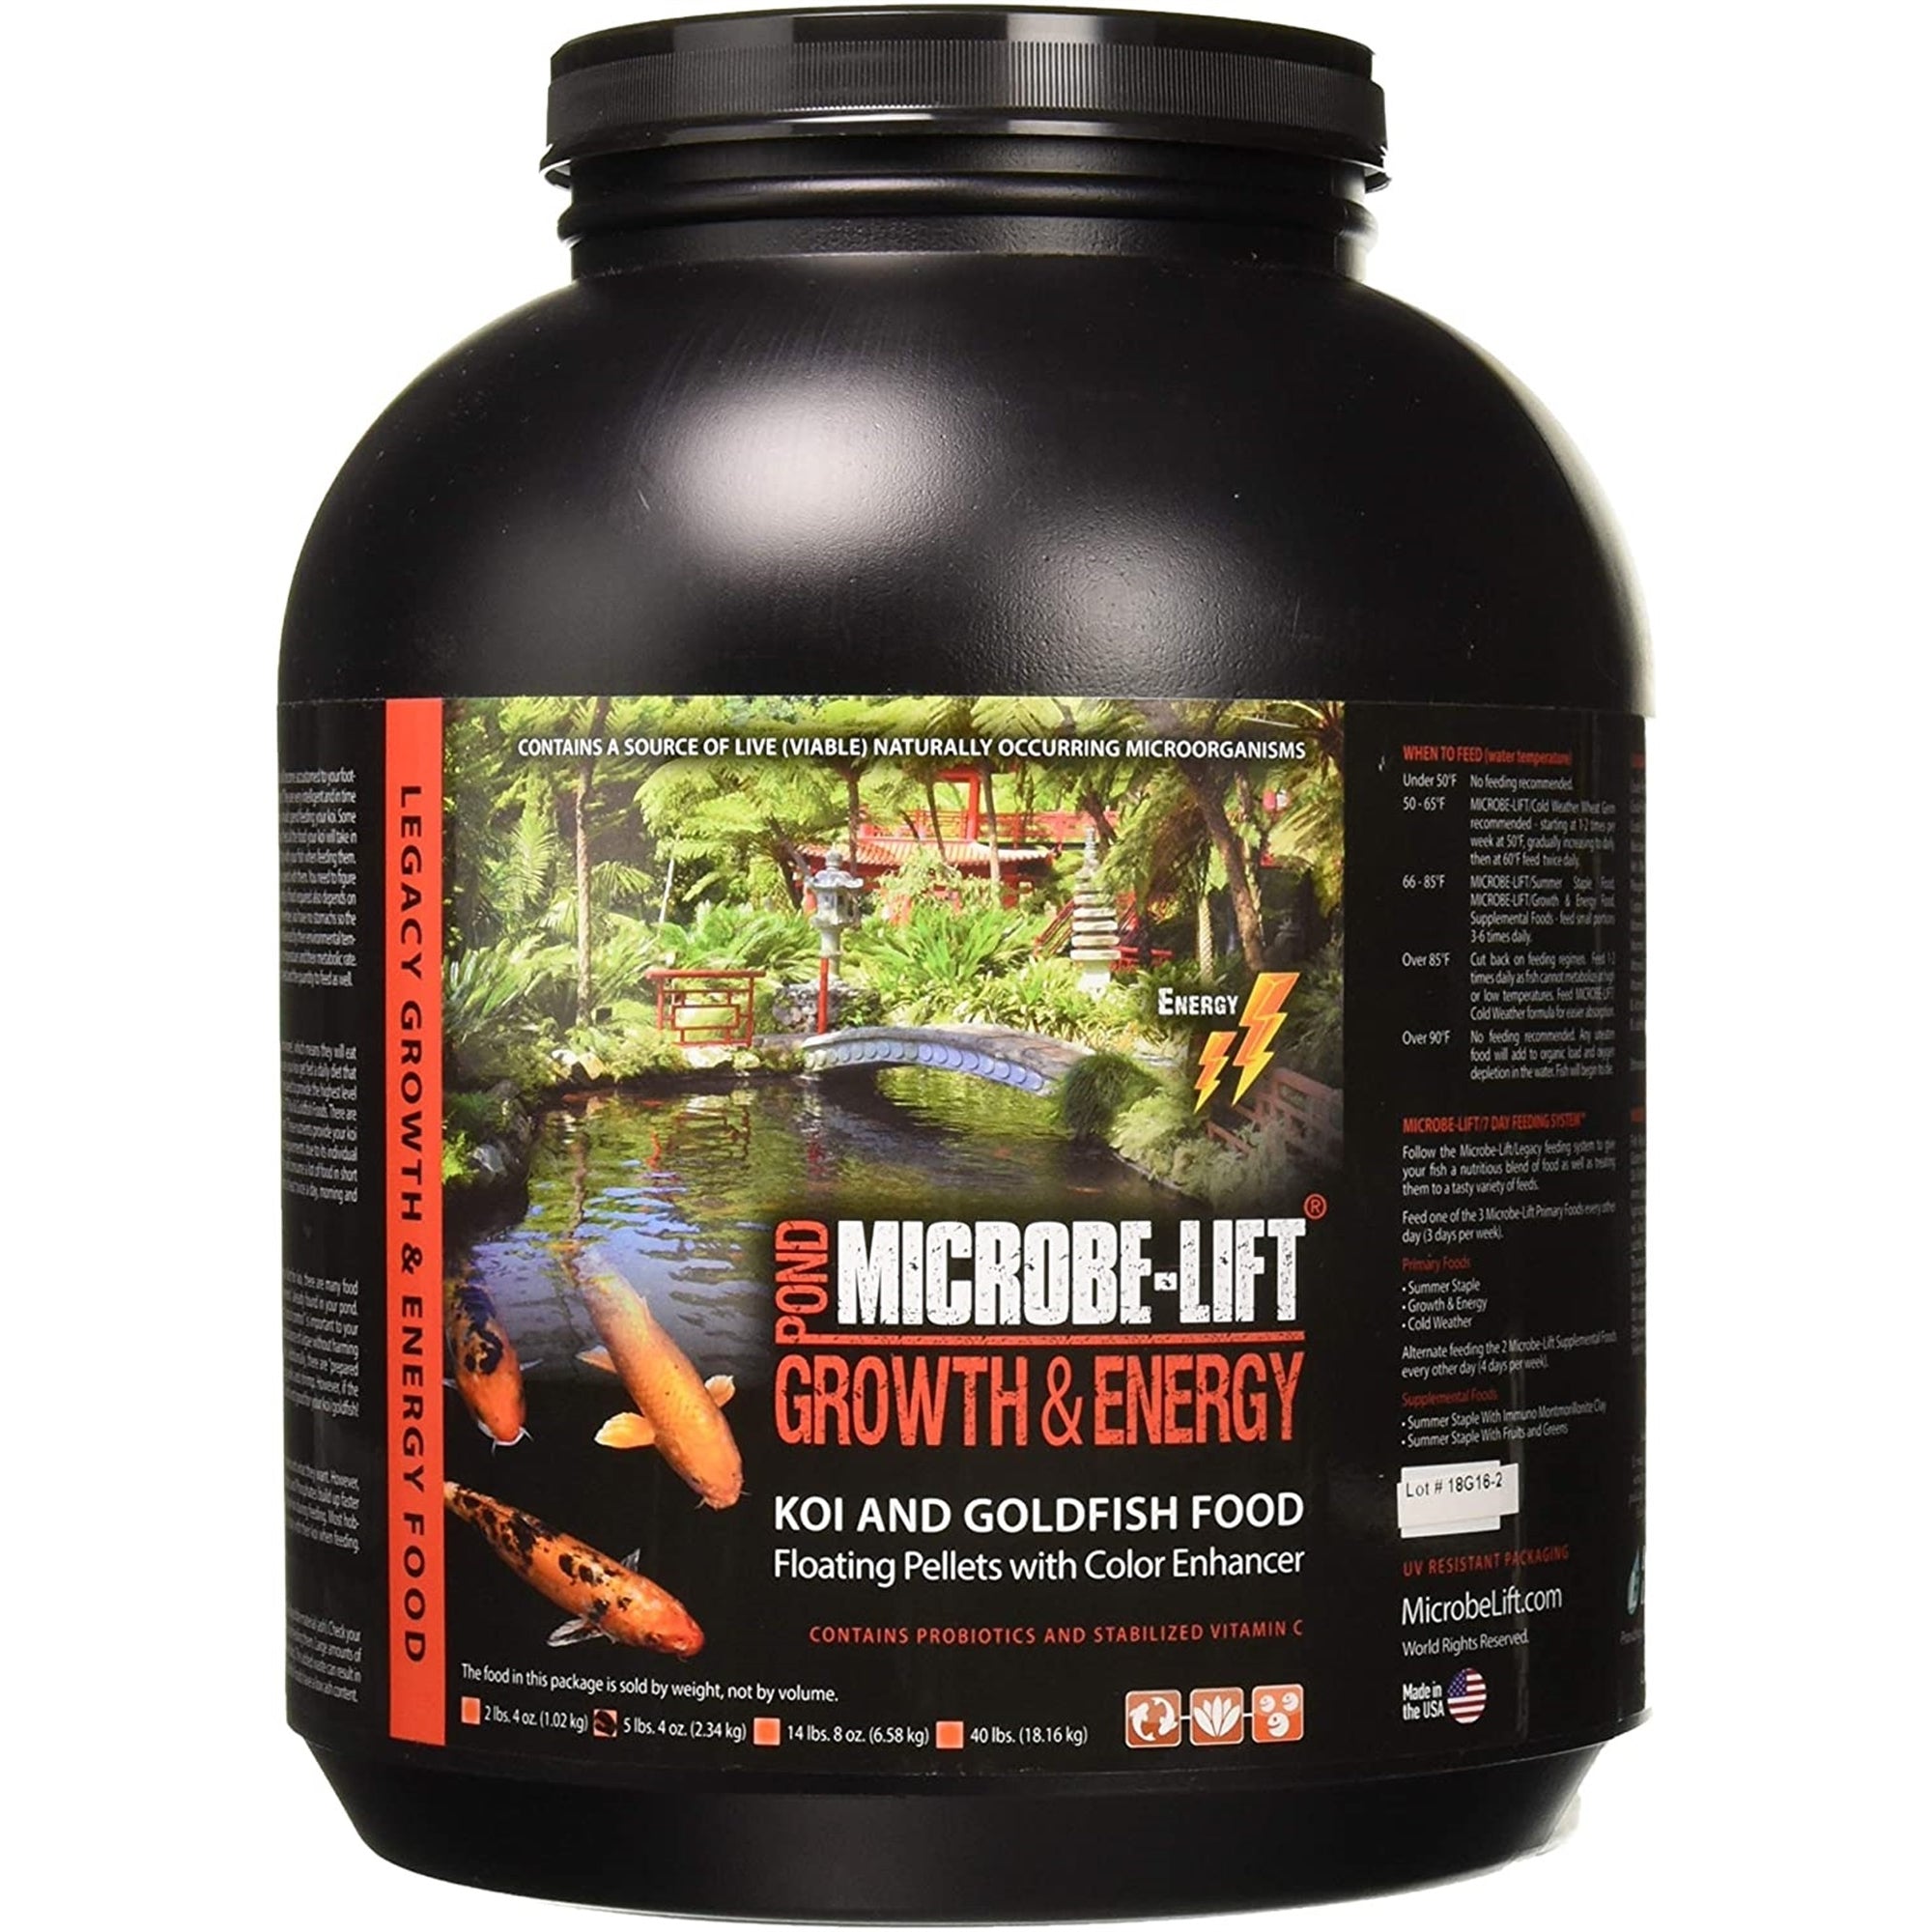 Ecological Labs Microbe Lift High Growth & Energy Fish Food, 5.4 LB